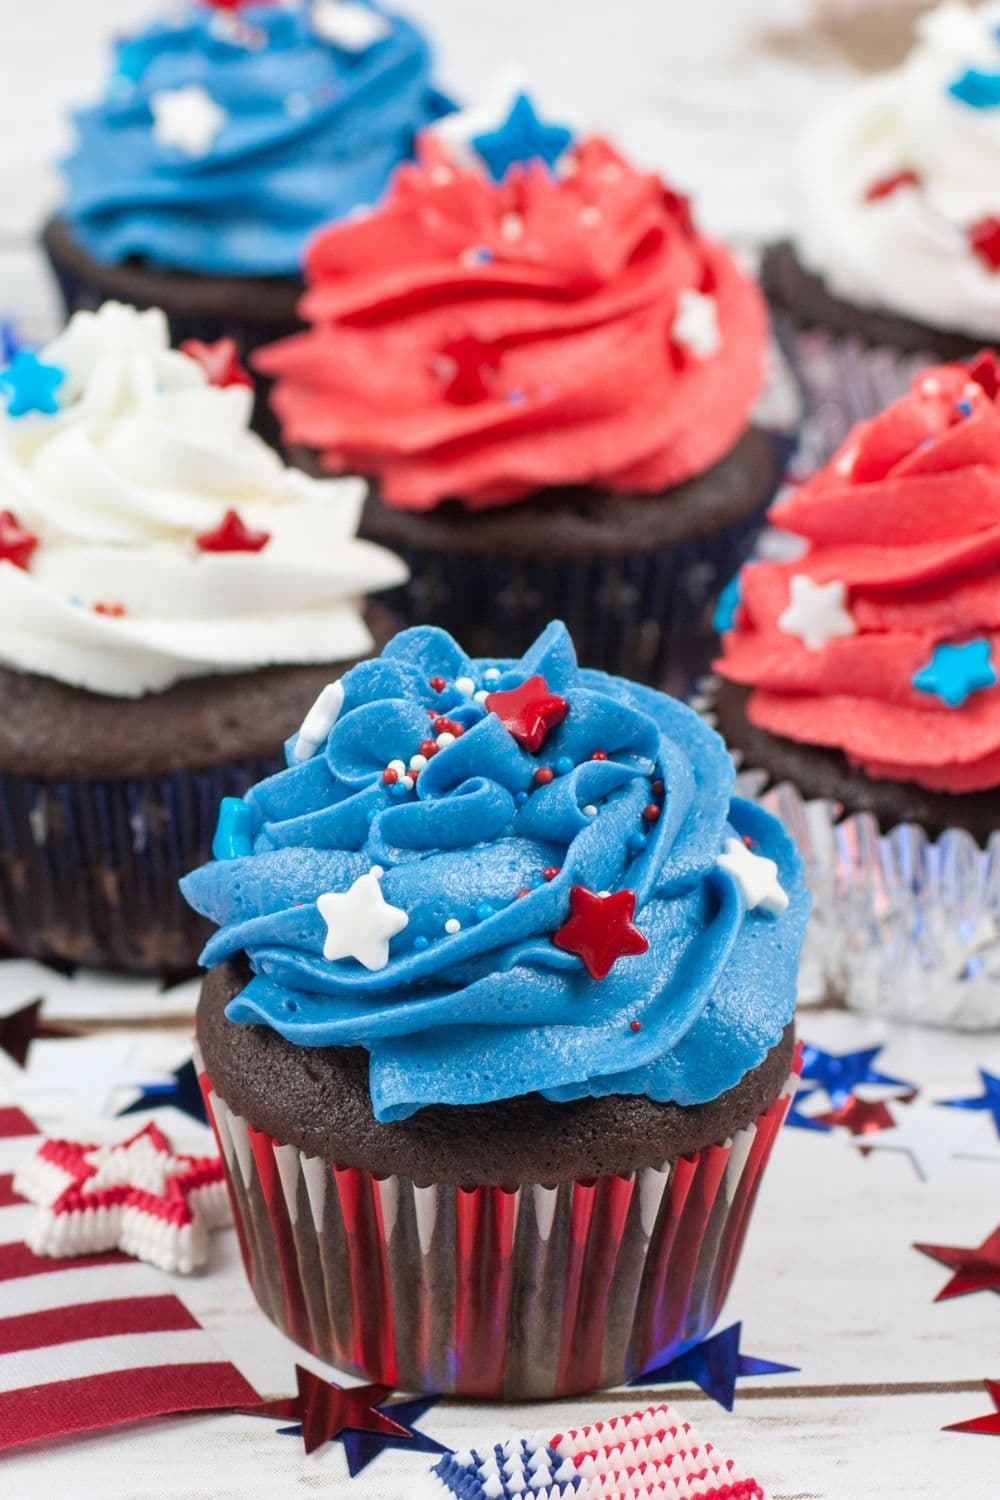 30 Best 4th of July Cupcakes To Feed a Crowd - Insanely Good